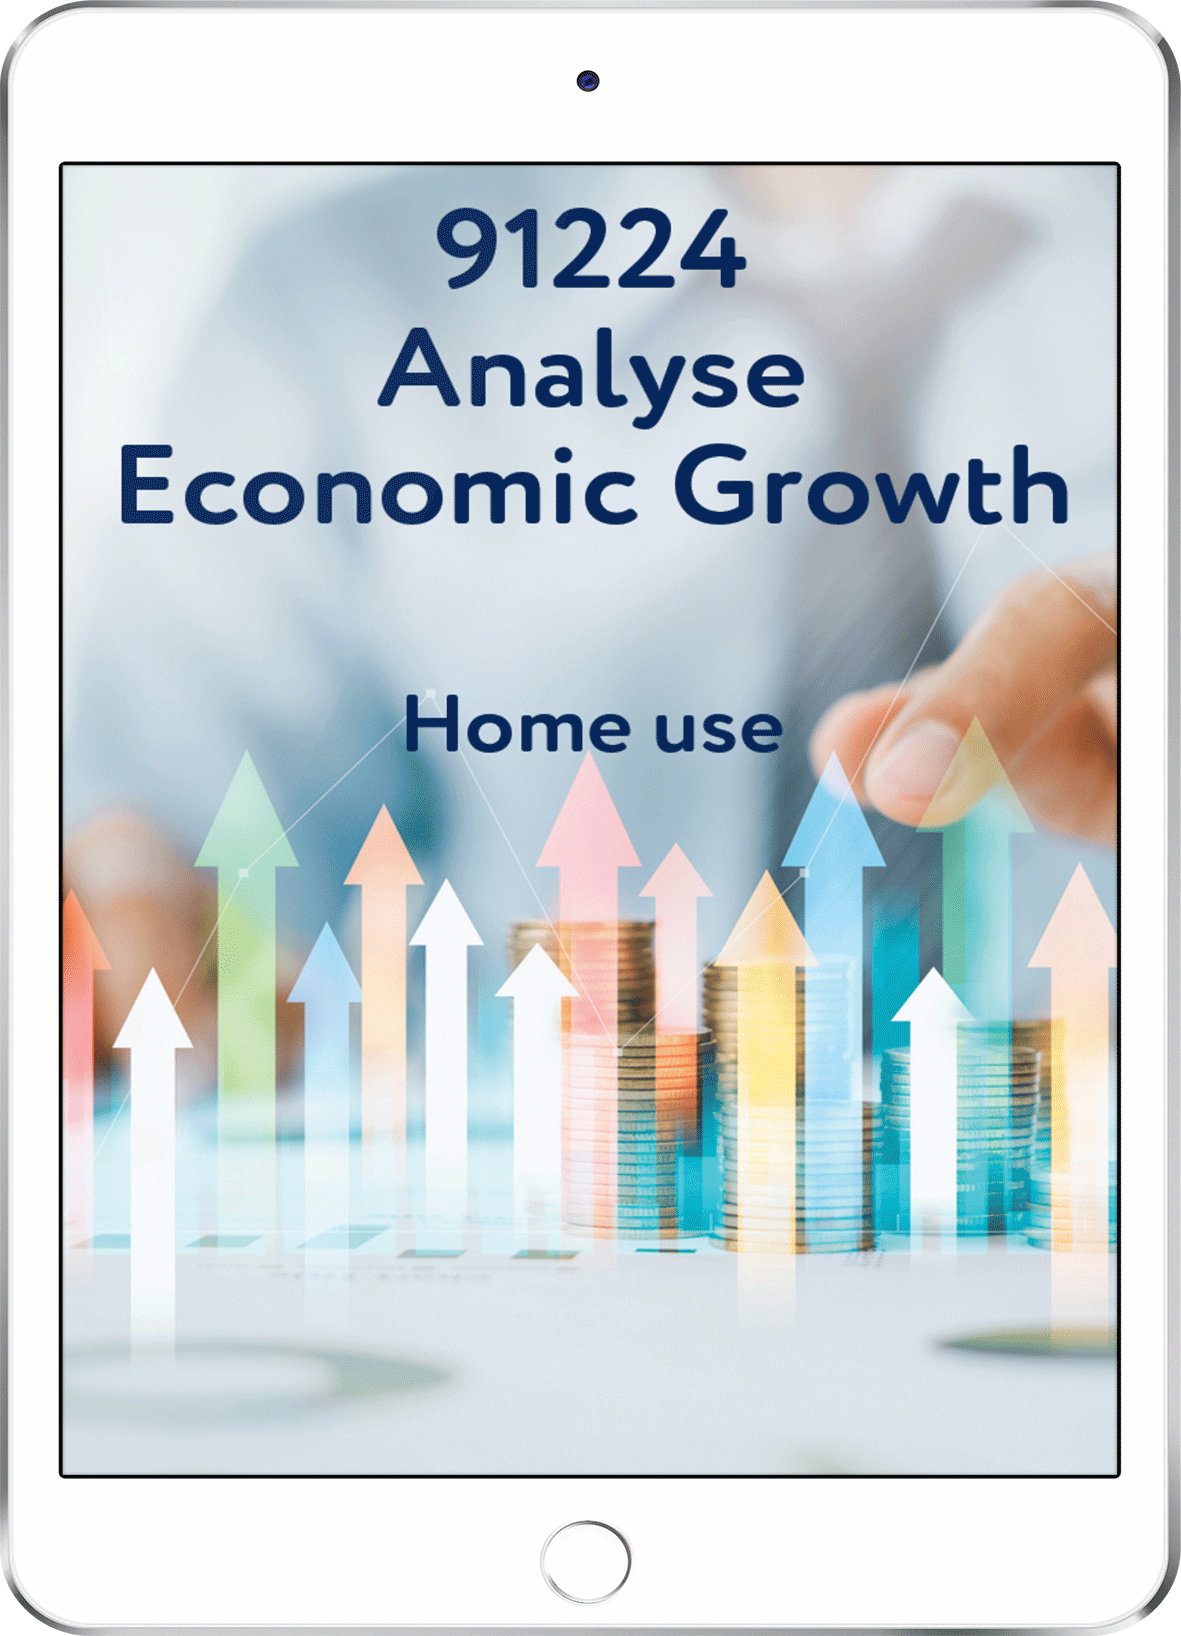 91224 Analyse Economic Growth - Home Use